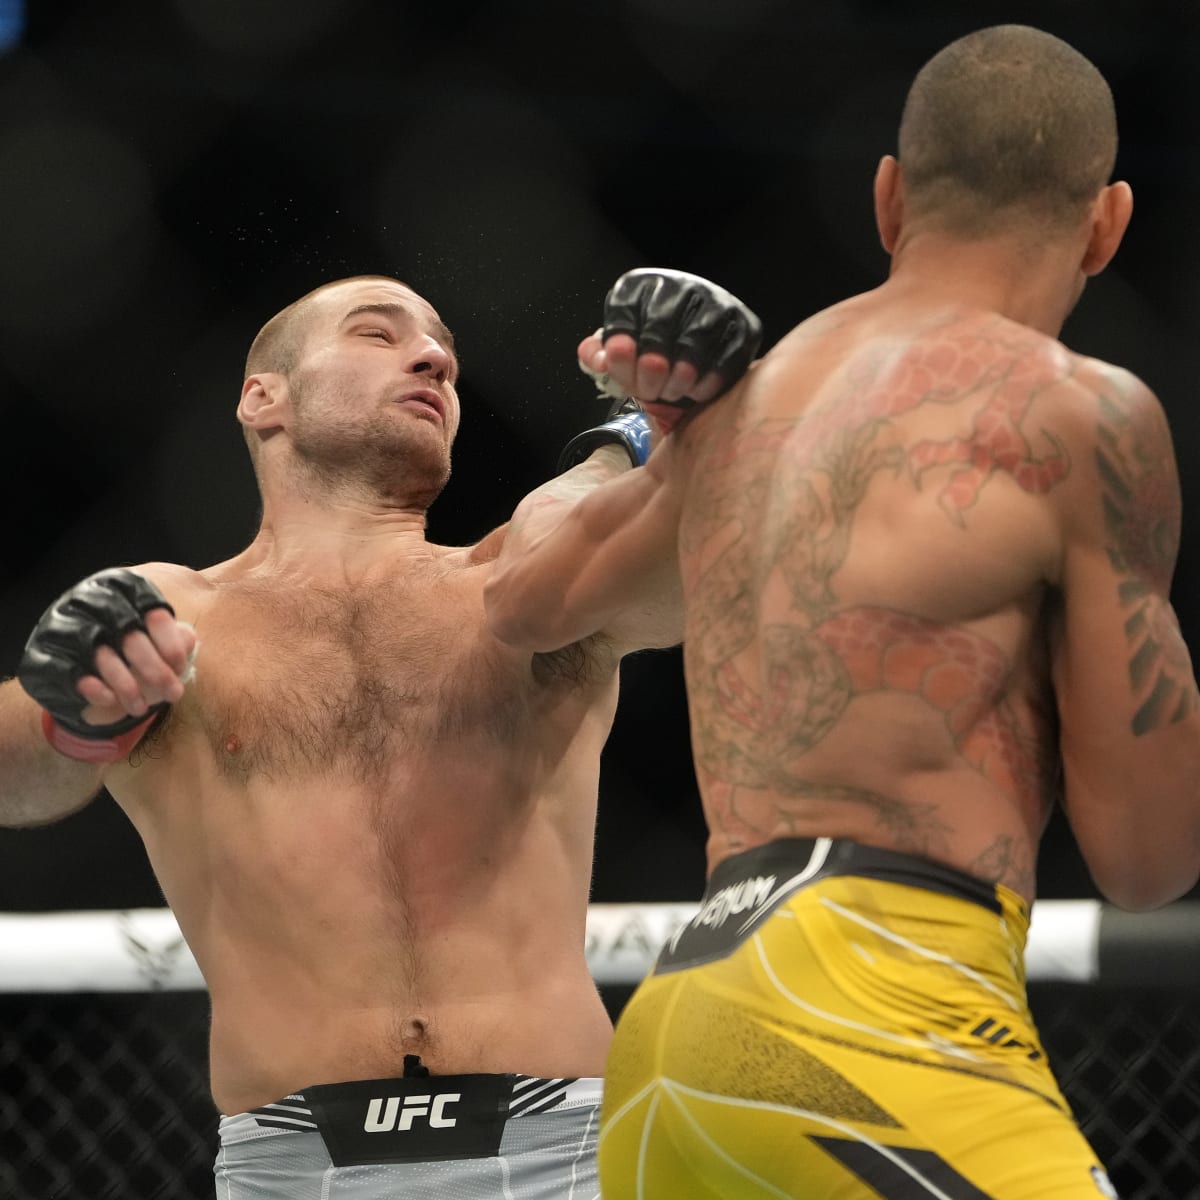 UFC Fight Night Strickland vs Magomdeov Prelims Free Live Stream - How to Watch and Stream Major League and College Sports